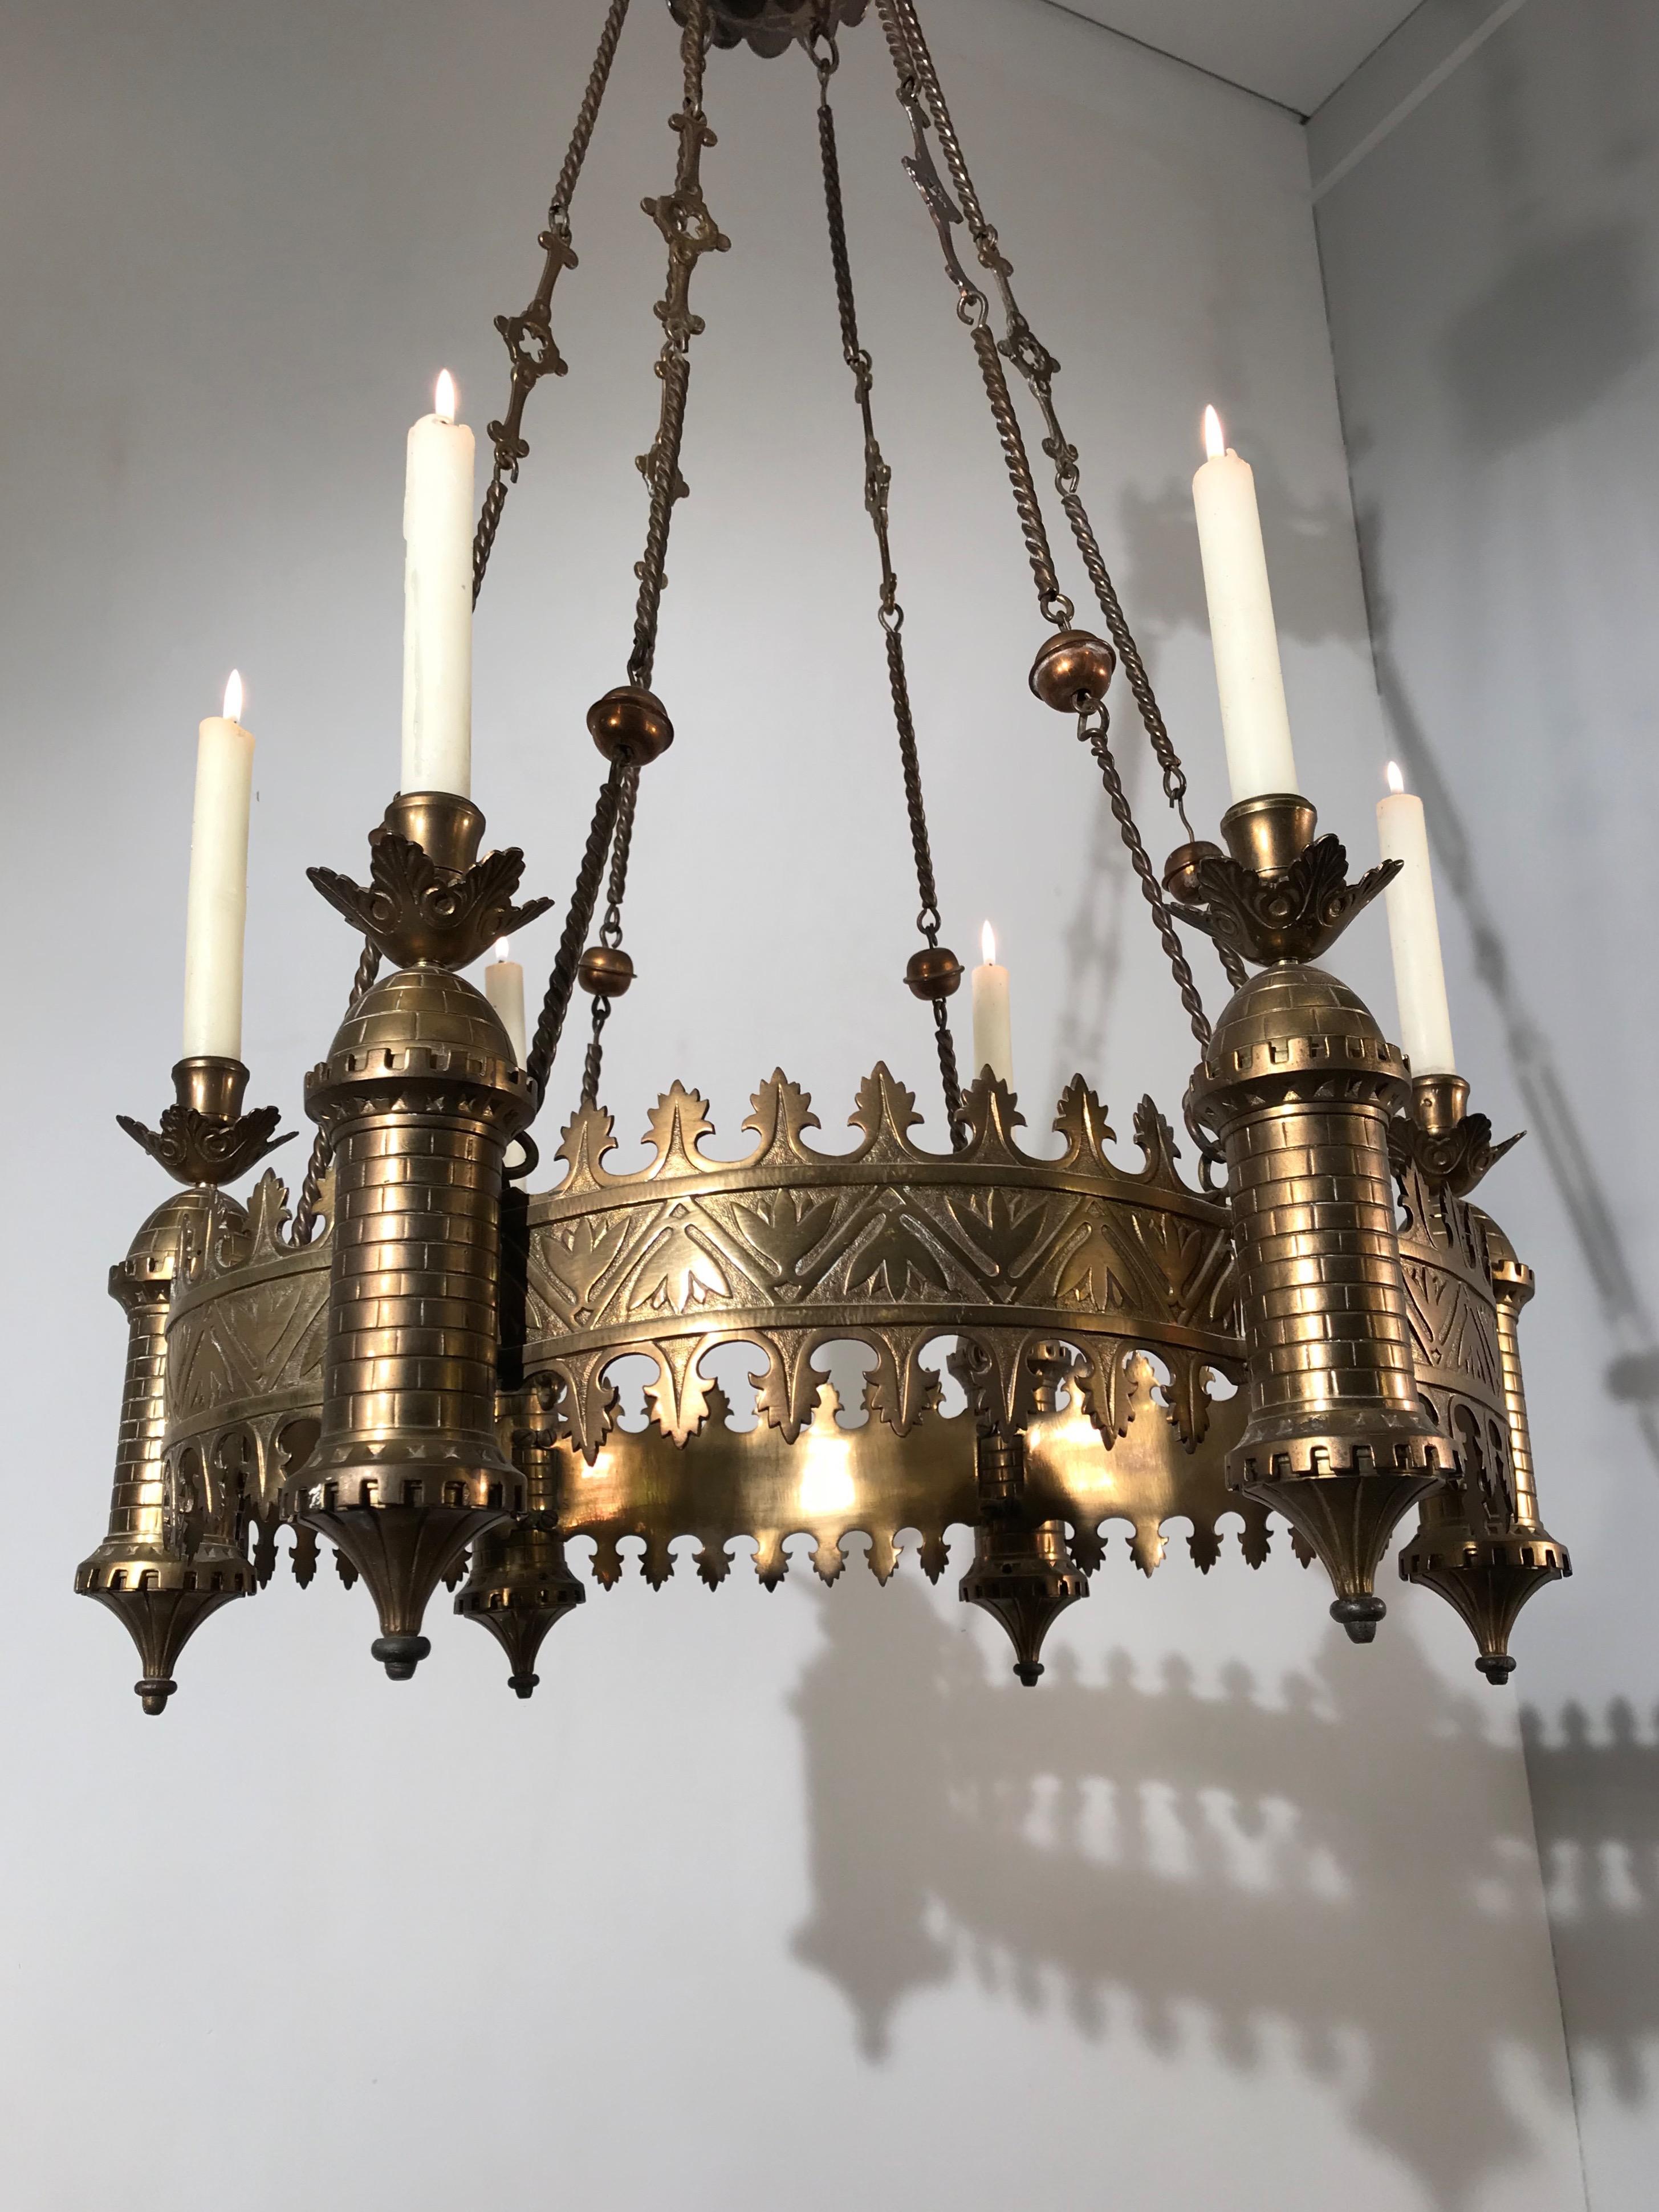 Antique Bronze and Brass Castle Tower Design Gothic Revival Candle Chandelier 7